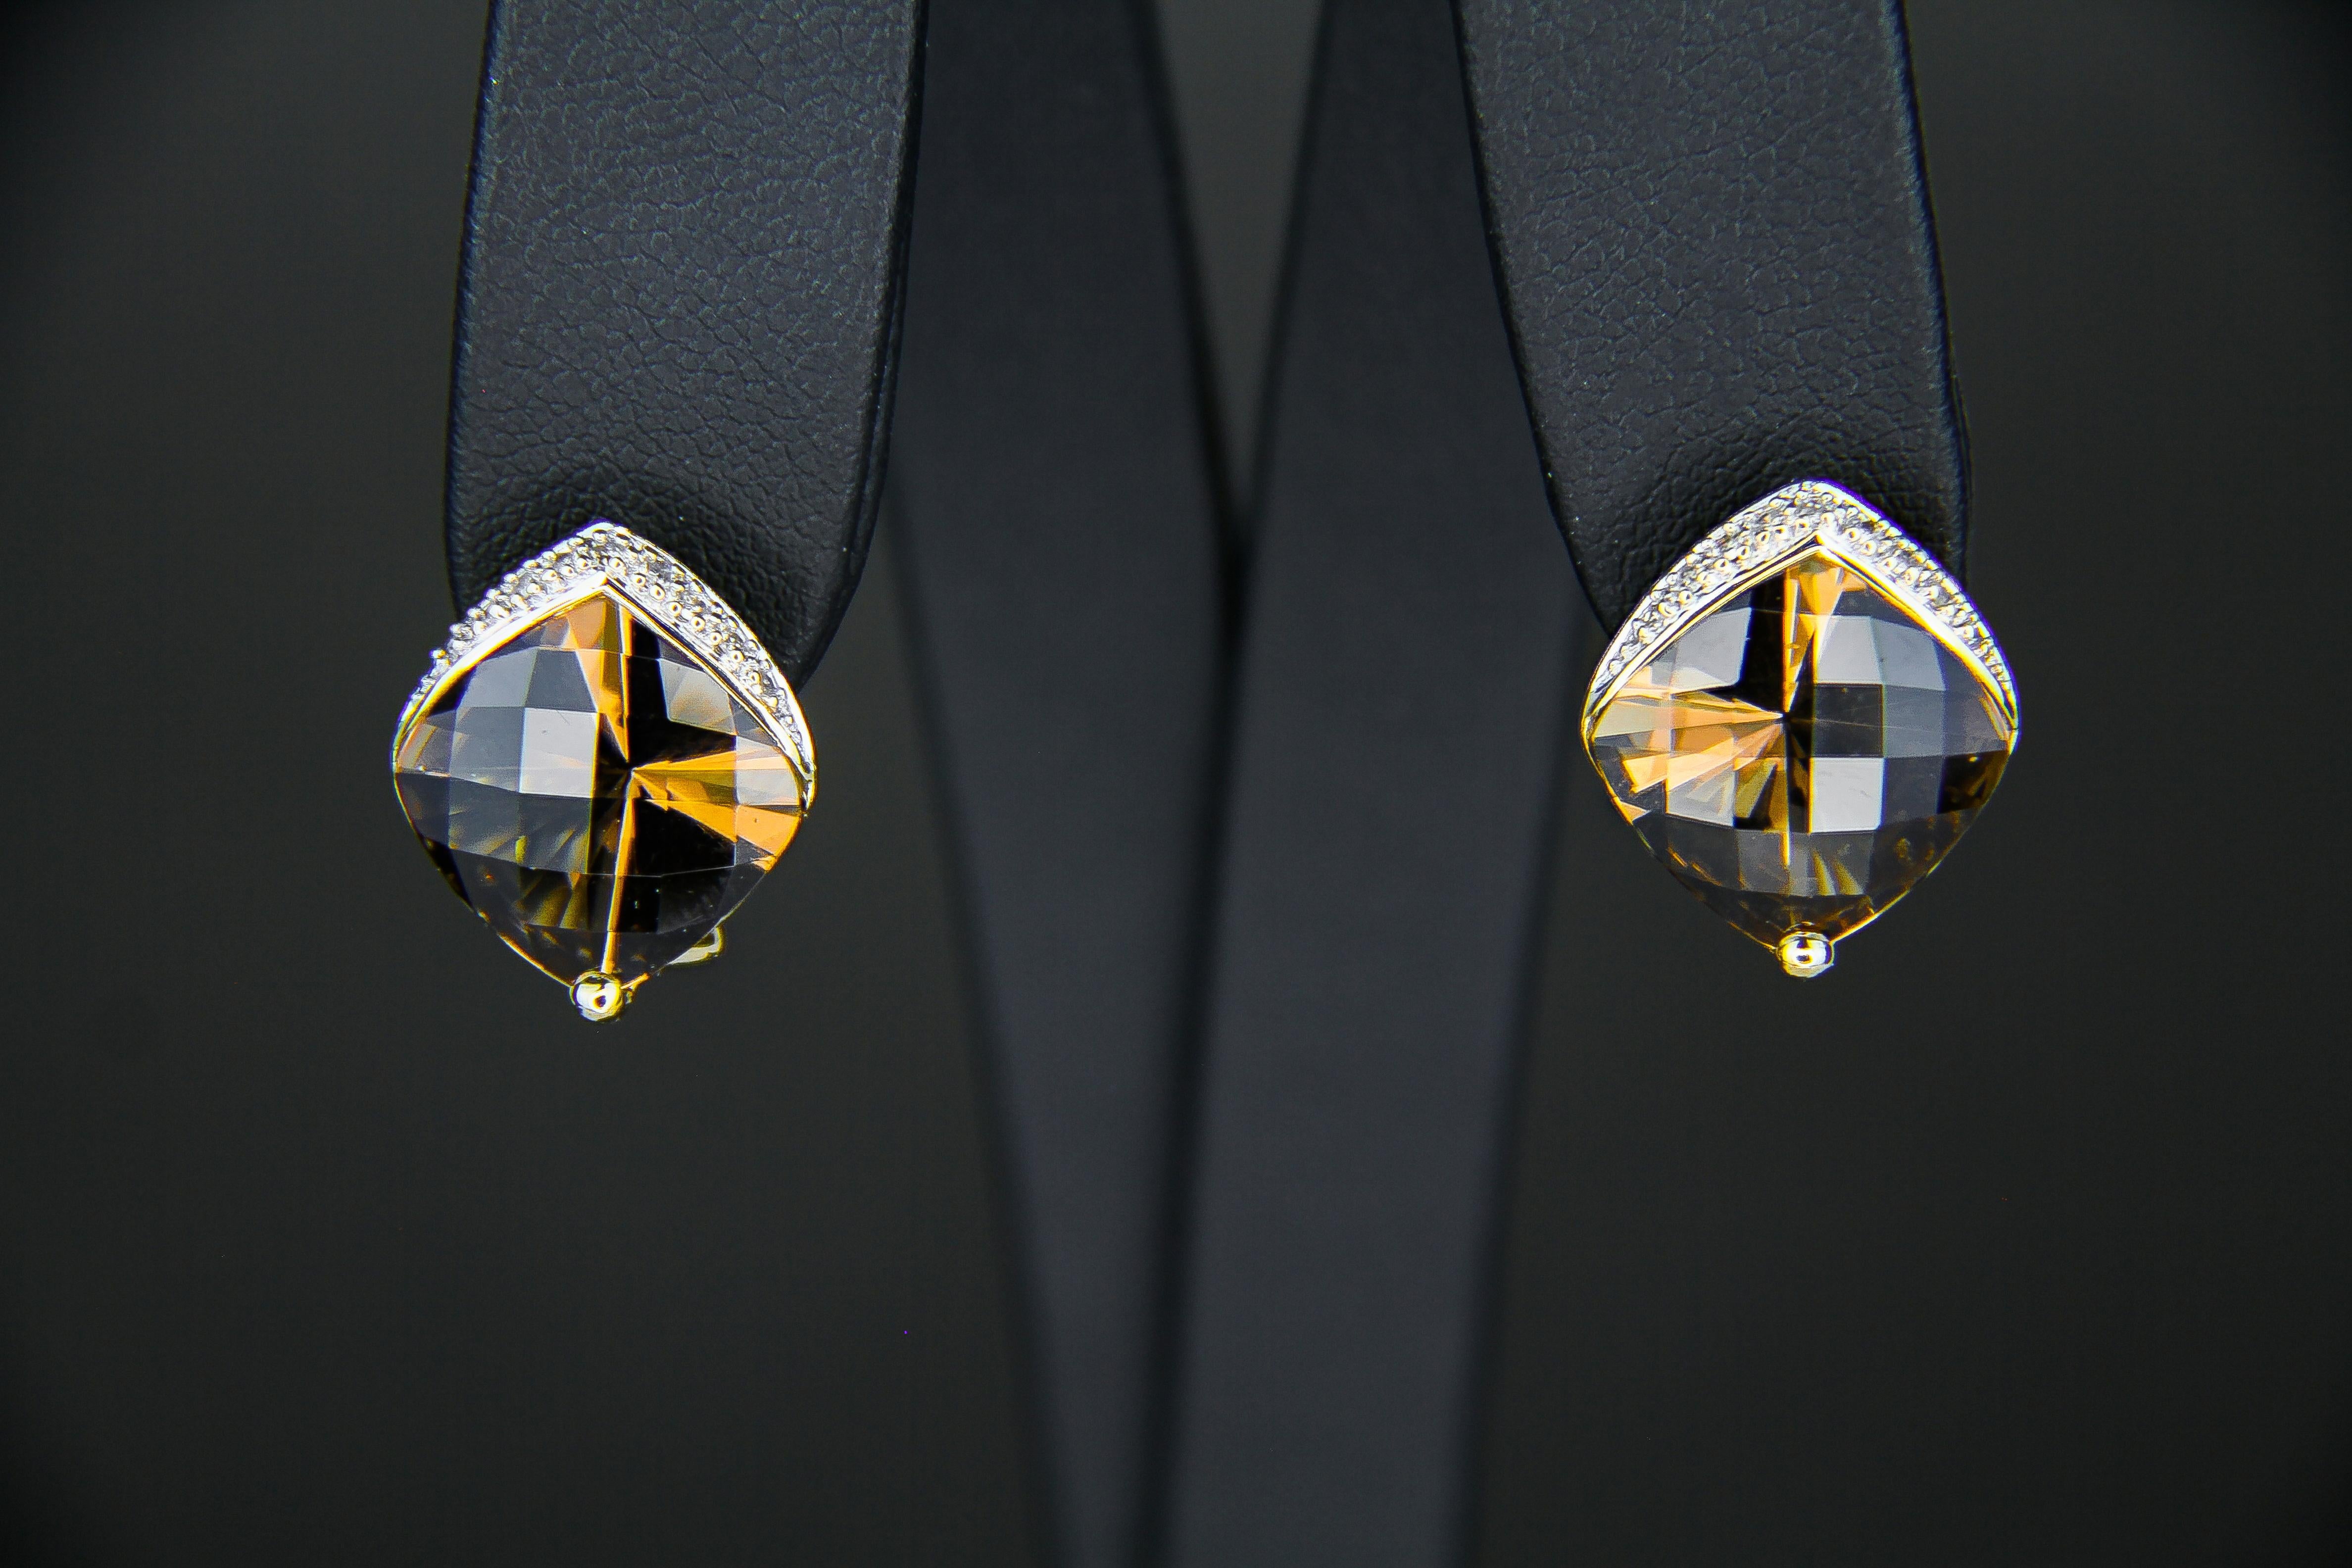 Smoky quartz earrings in 14k gold. 

Central stone: Smoky quartz - 2 pieces
Cut:  cushion fancy cut
Weight: 16 ct. total
Color: golden brown 
Clarity: Transparent with inclusions
Other stones:
Diamonds: round - brilliant cut,  G-H/VS1 0.3 ct.